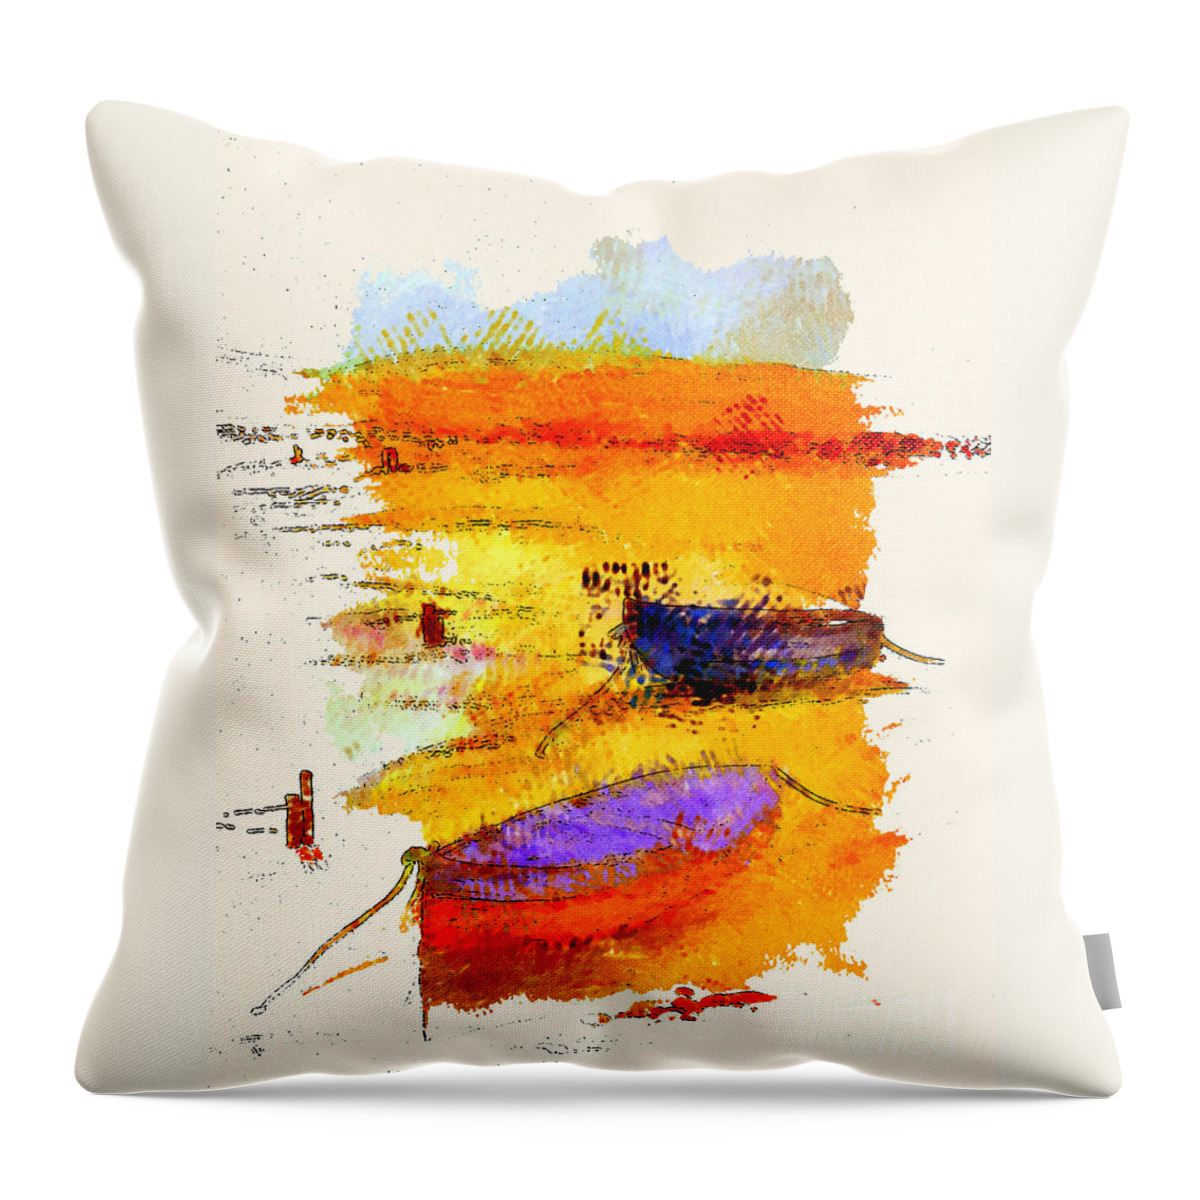 Boats Throw Pillow featuring the painting A Little Dingy by Julie Lueders 